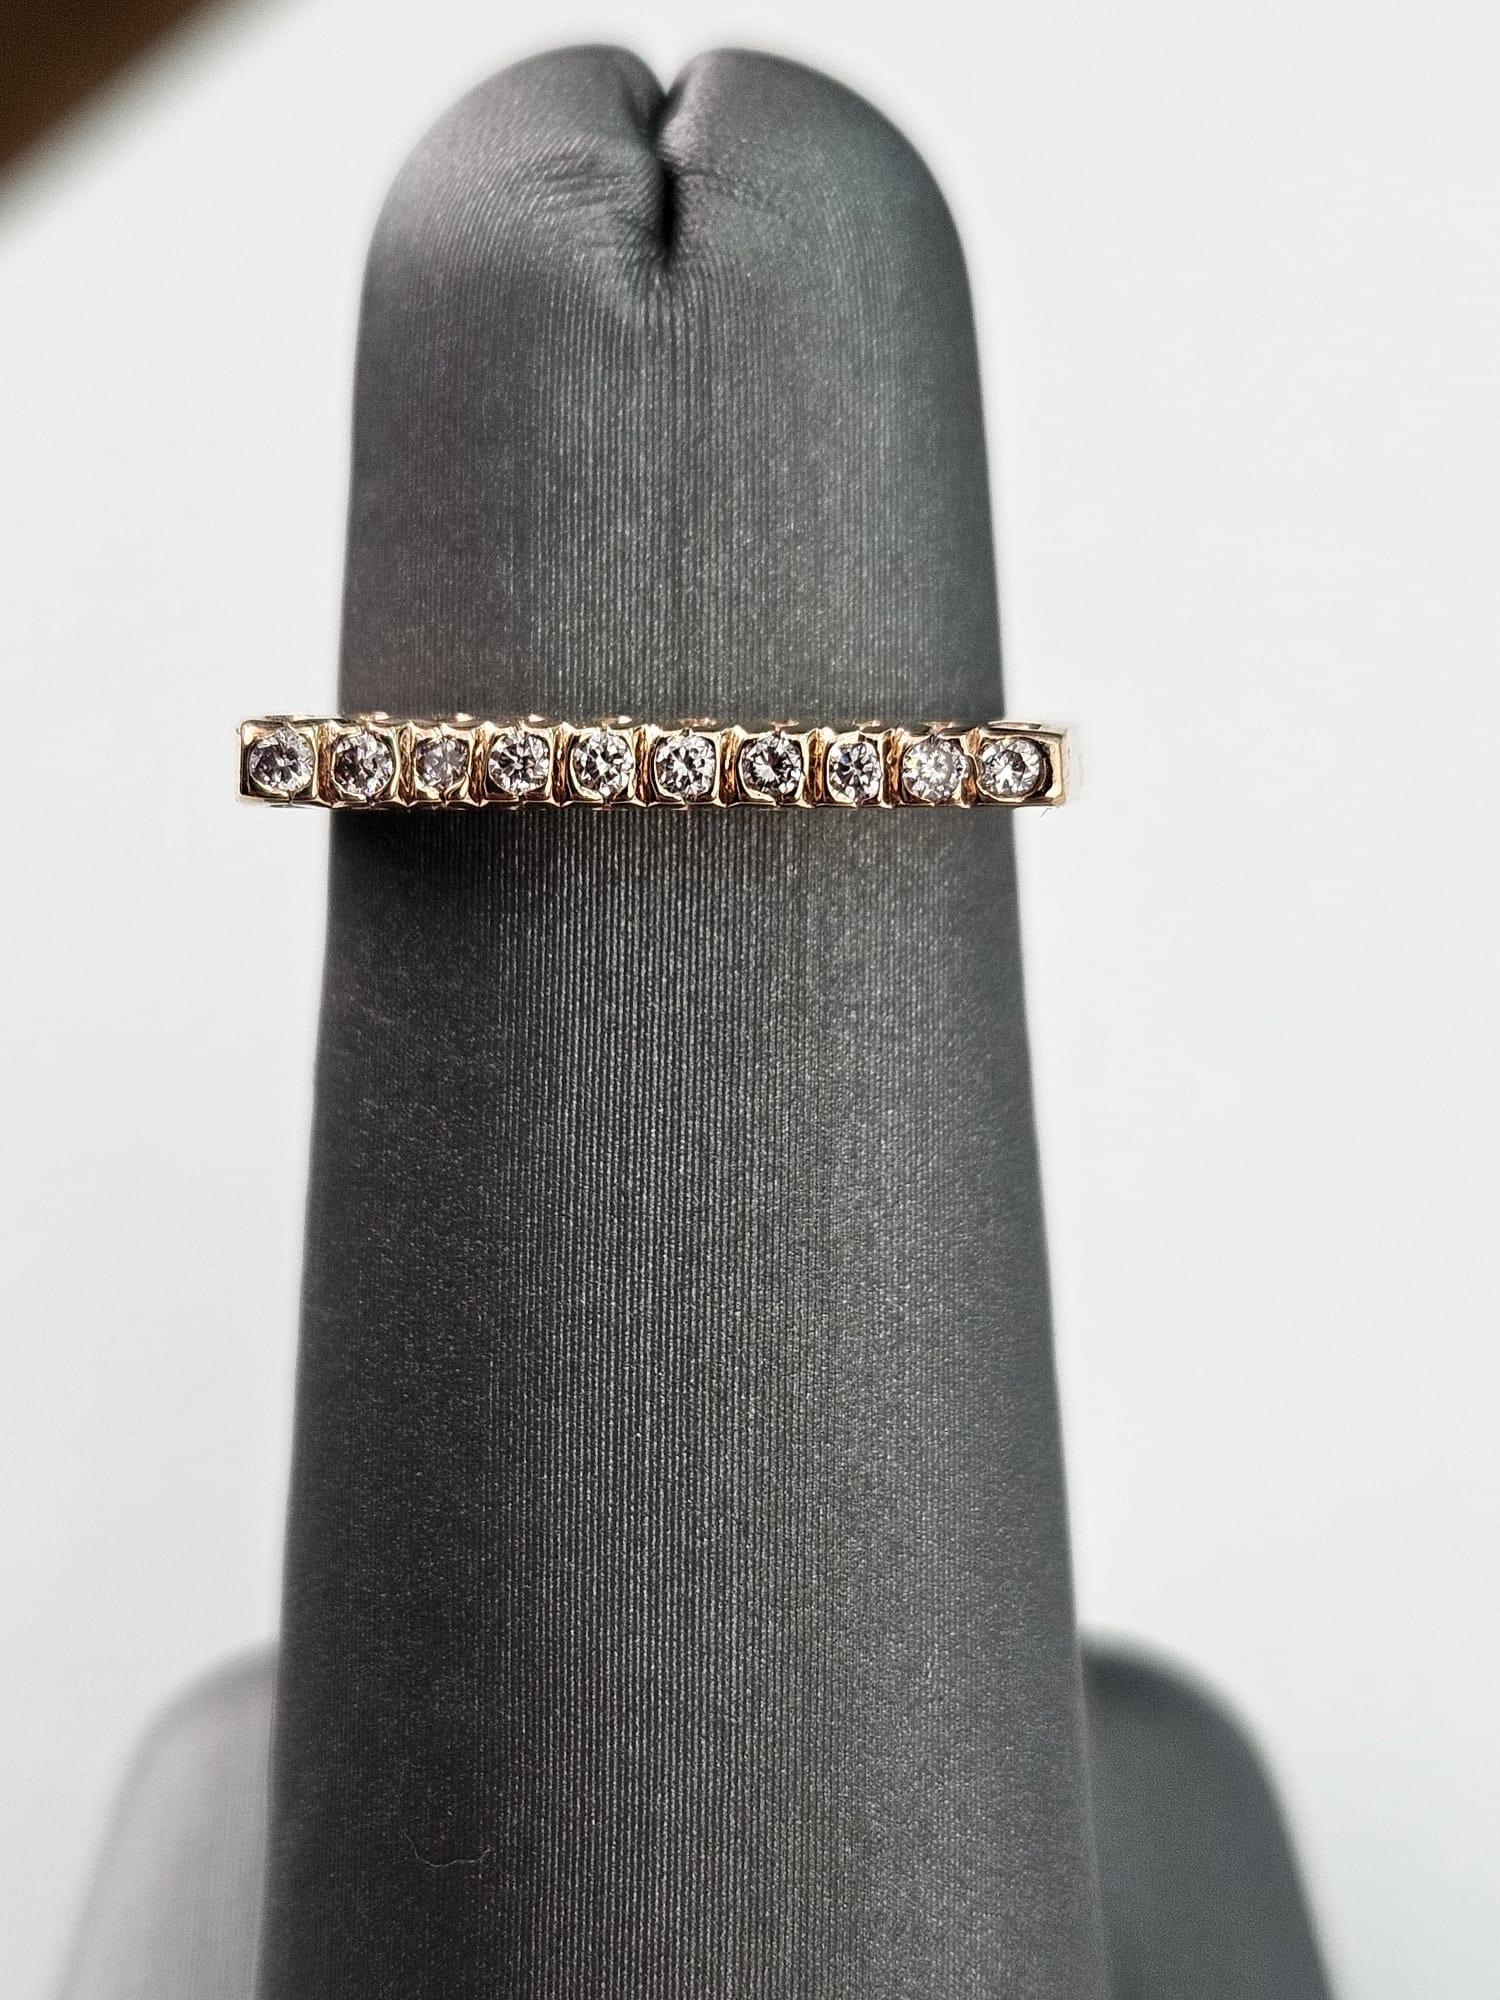 Introducing a mesmerizing and elegant 0.13 carat Pink Diamond band ring, meticulously crafted in luxurious rose gold, designed to radiate romance and sophistication. This exquisite ring features a straight line of shimmering Pink Diamonds, totaling